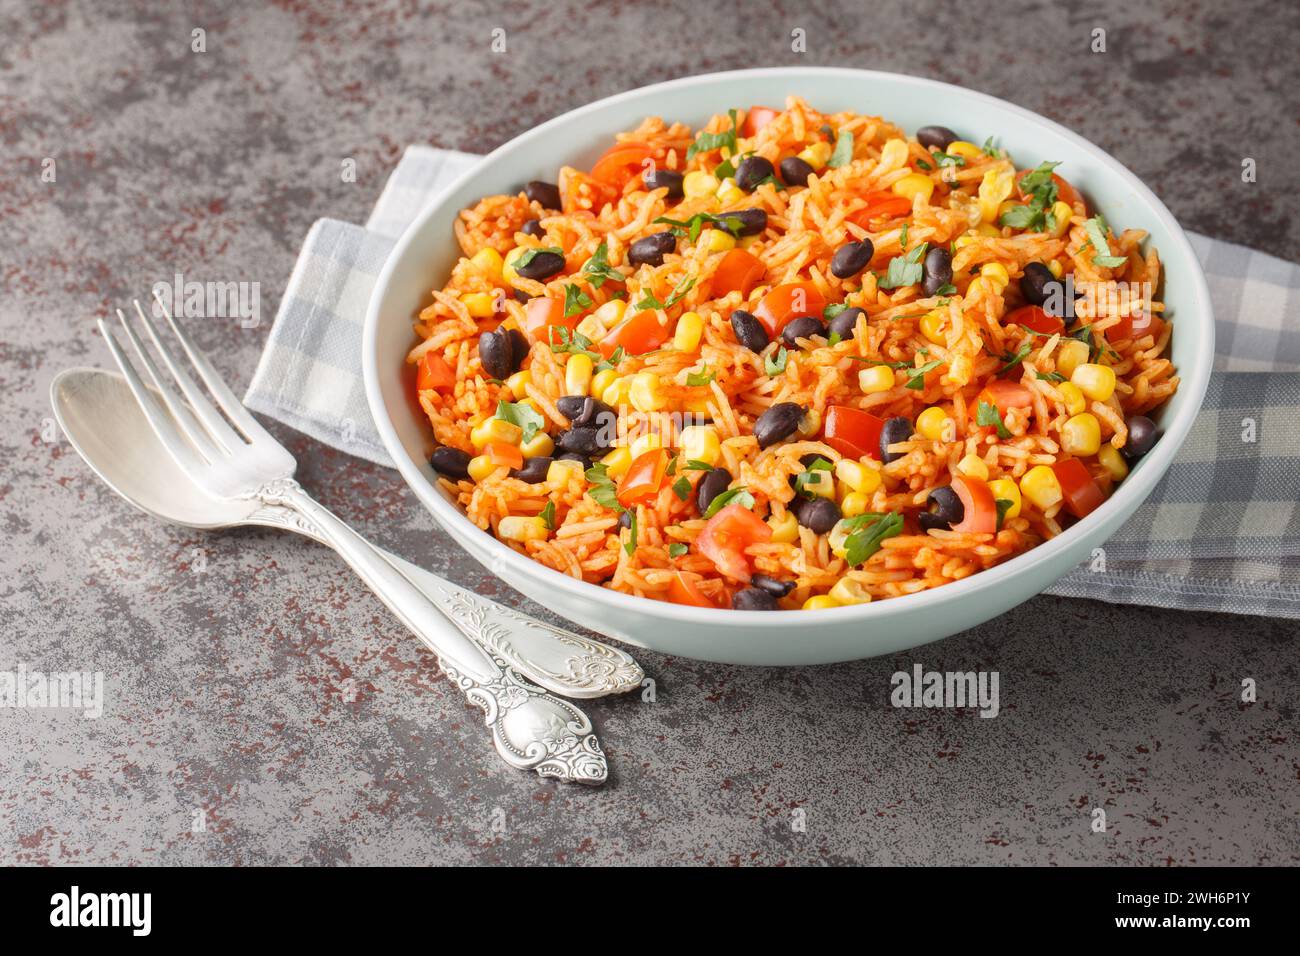 Spanish, Mexican tomato spicy rice with beans close-up in a bowl on the table. Horizontal Stock Photo